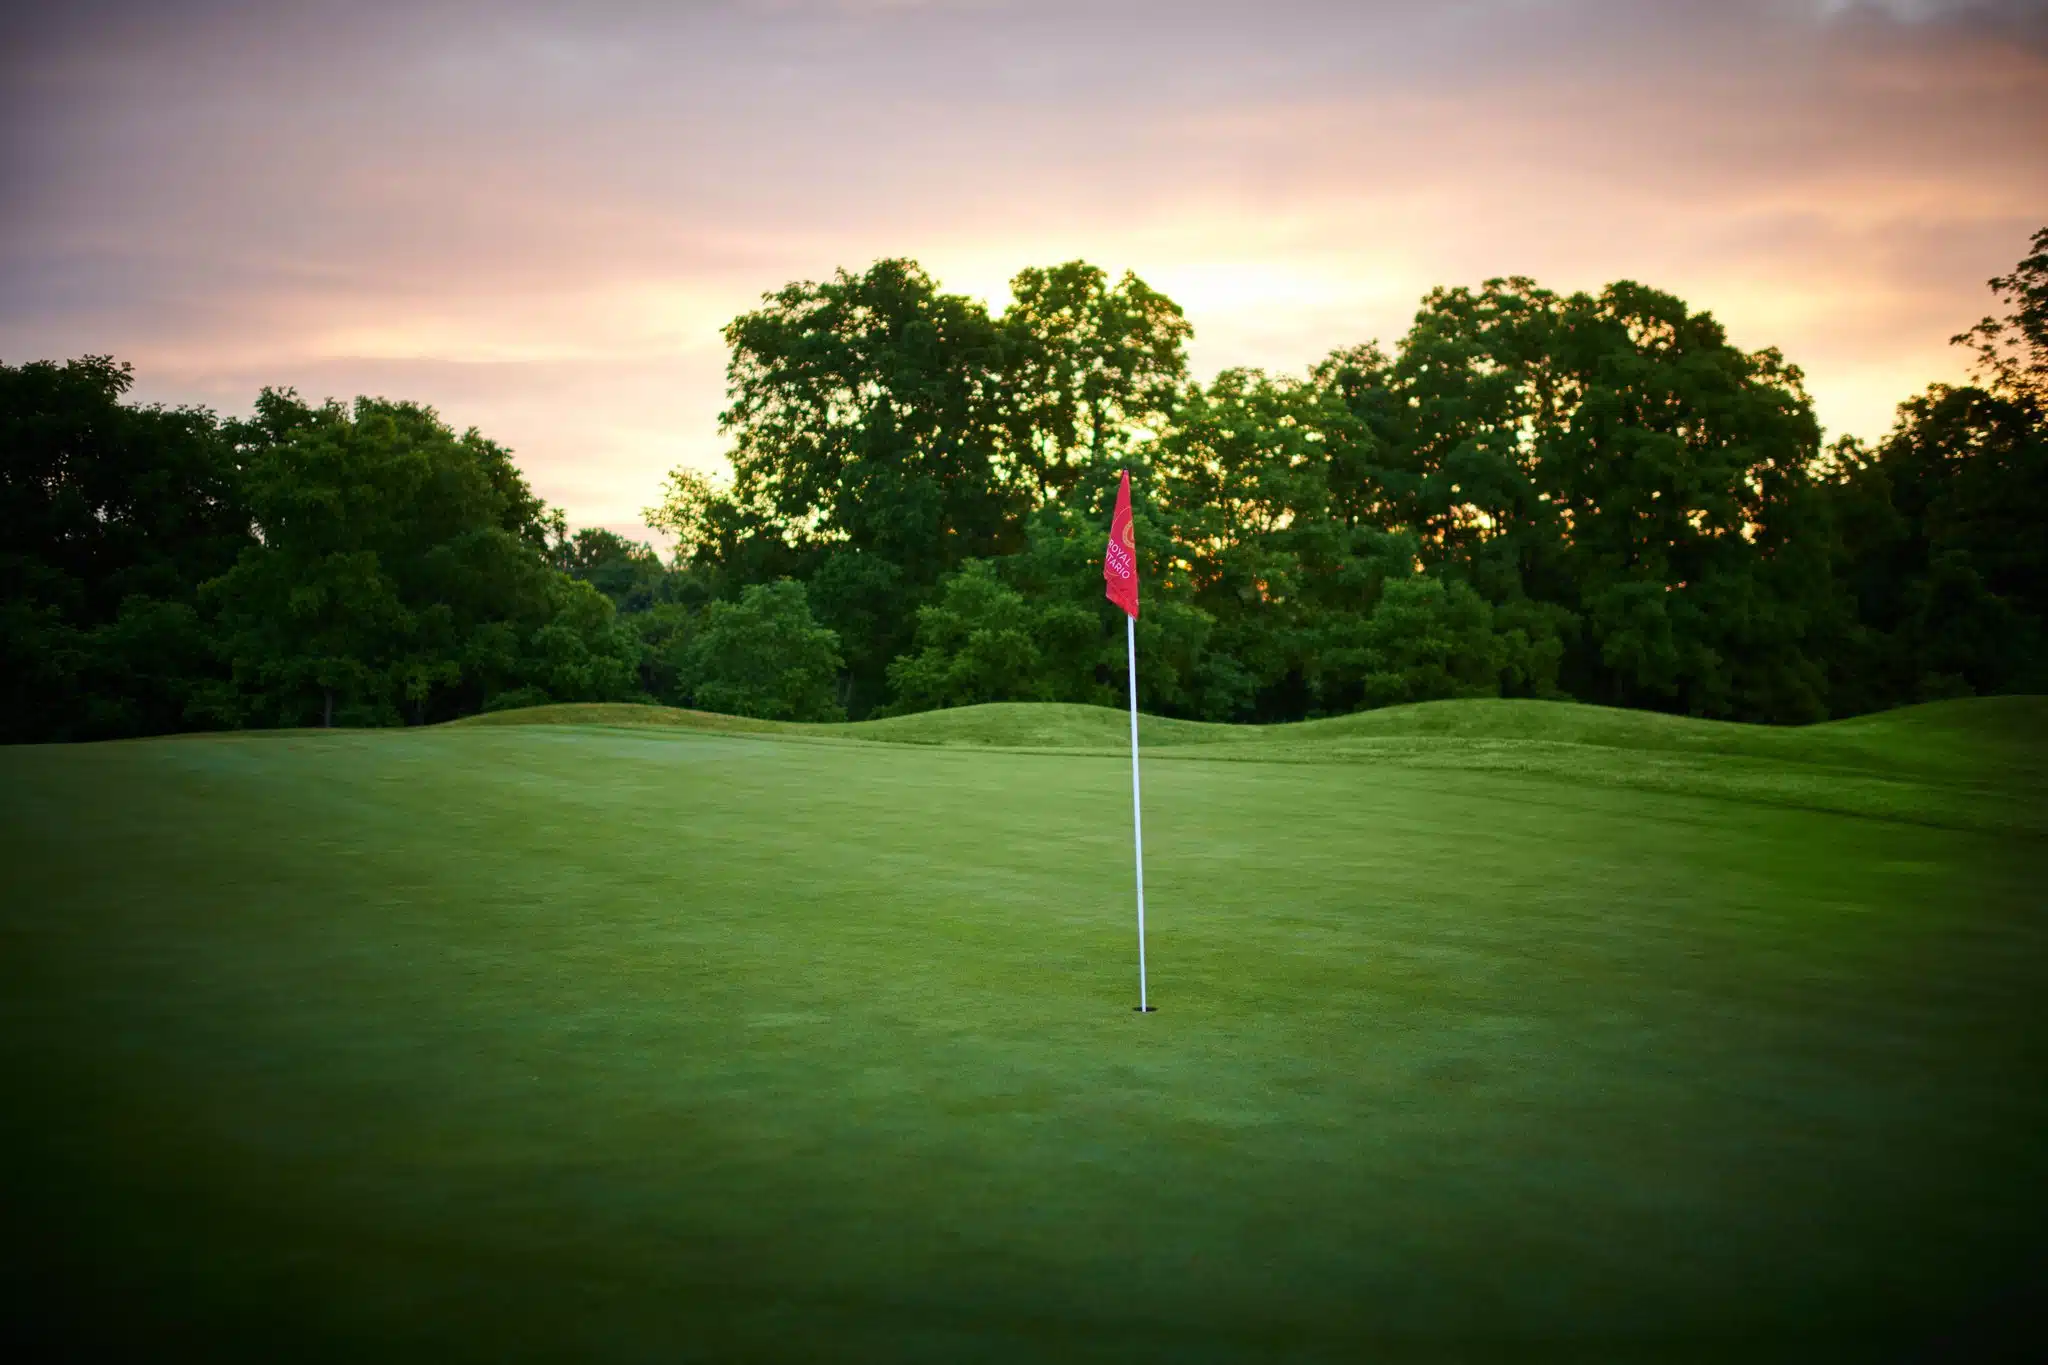 Light pink sunrise over the greens with red flag.